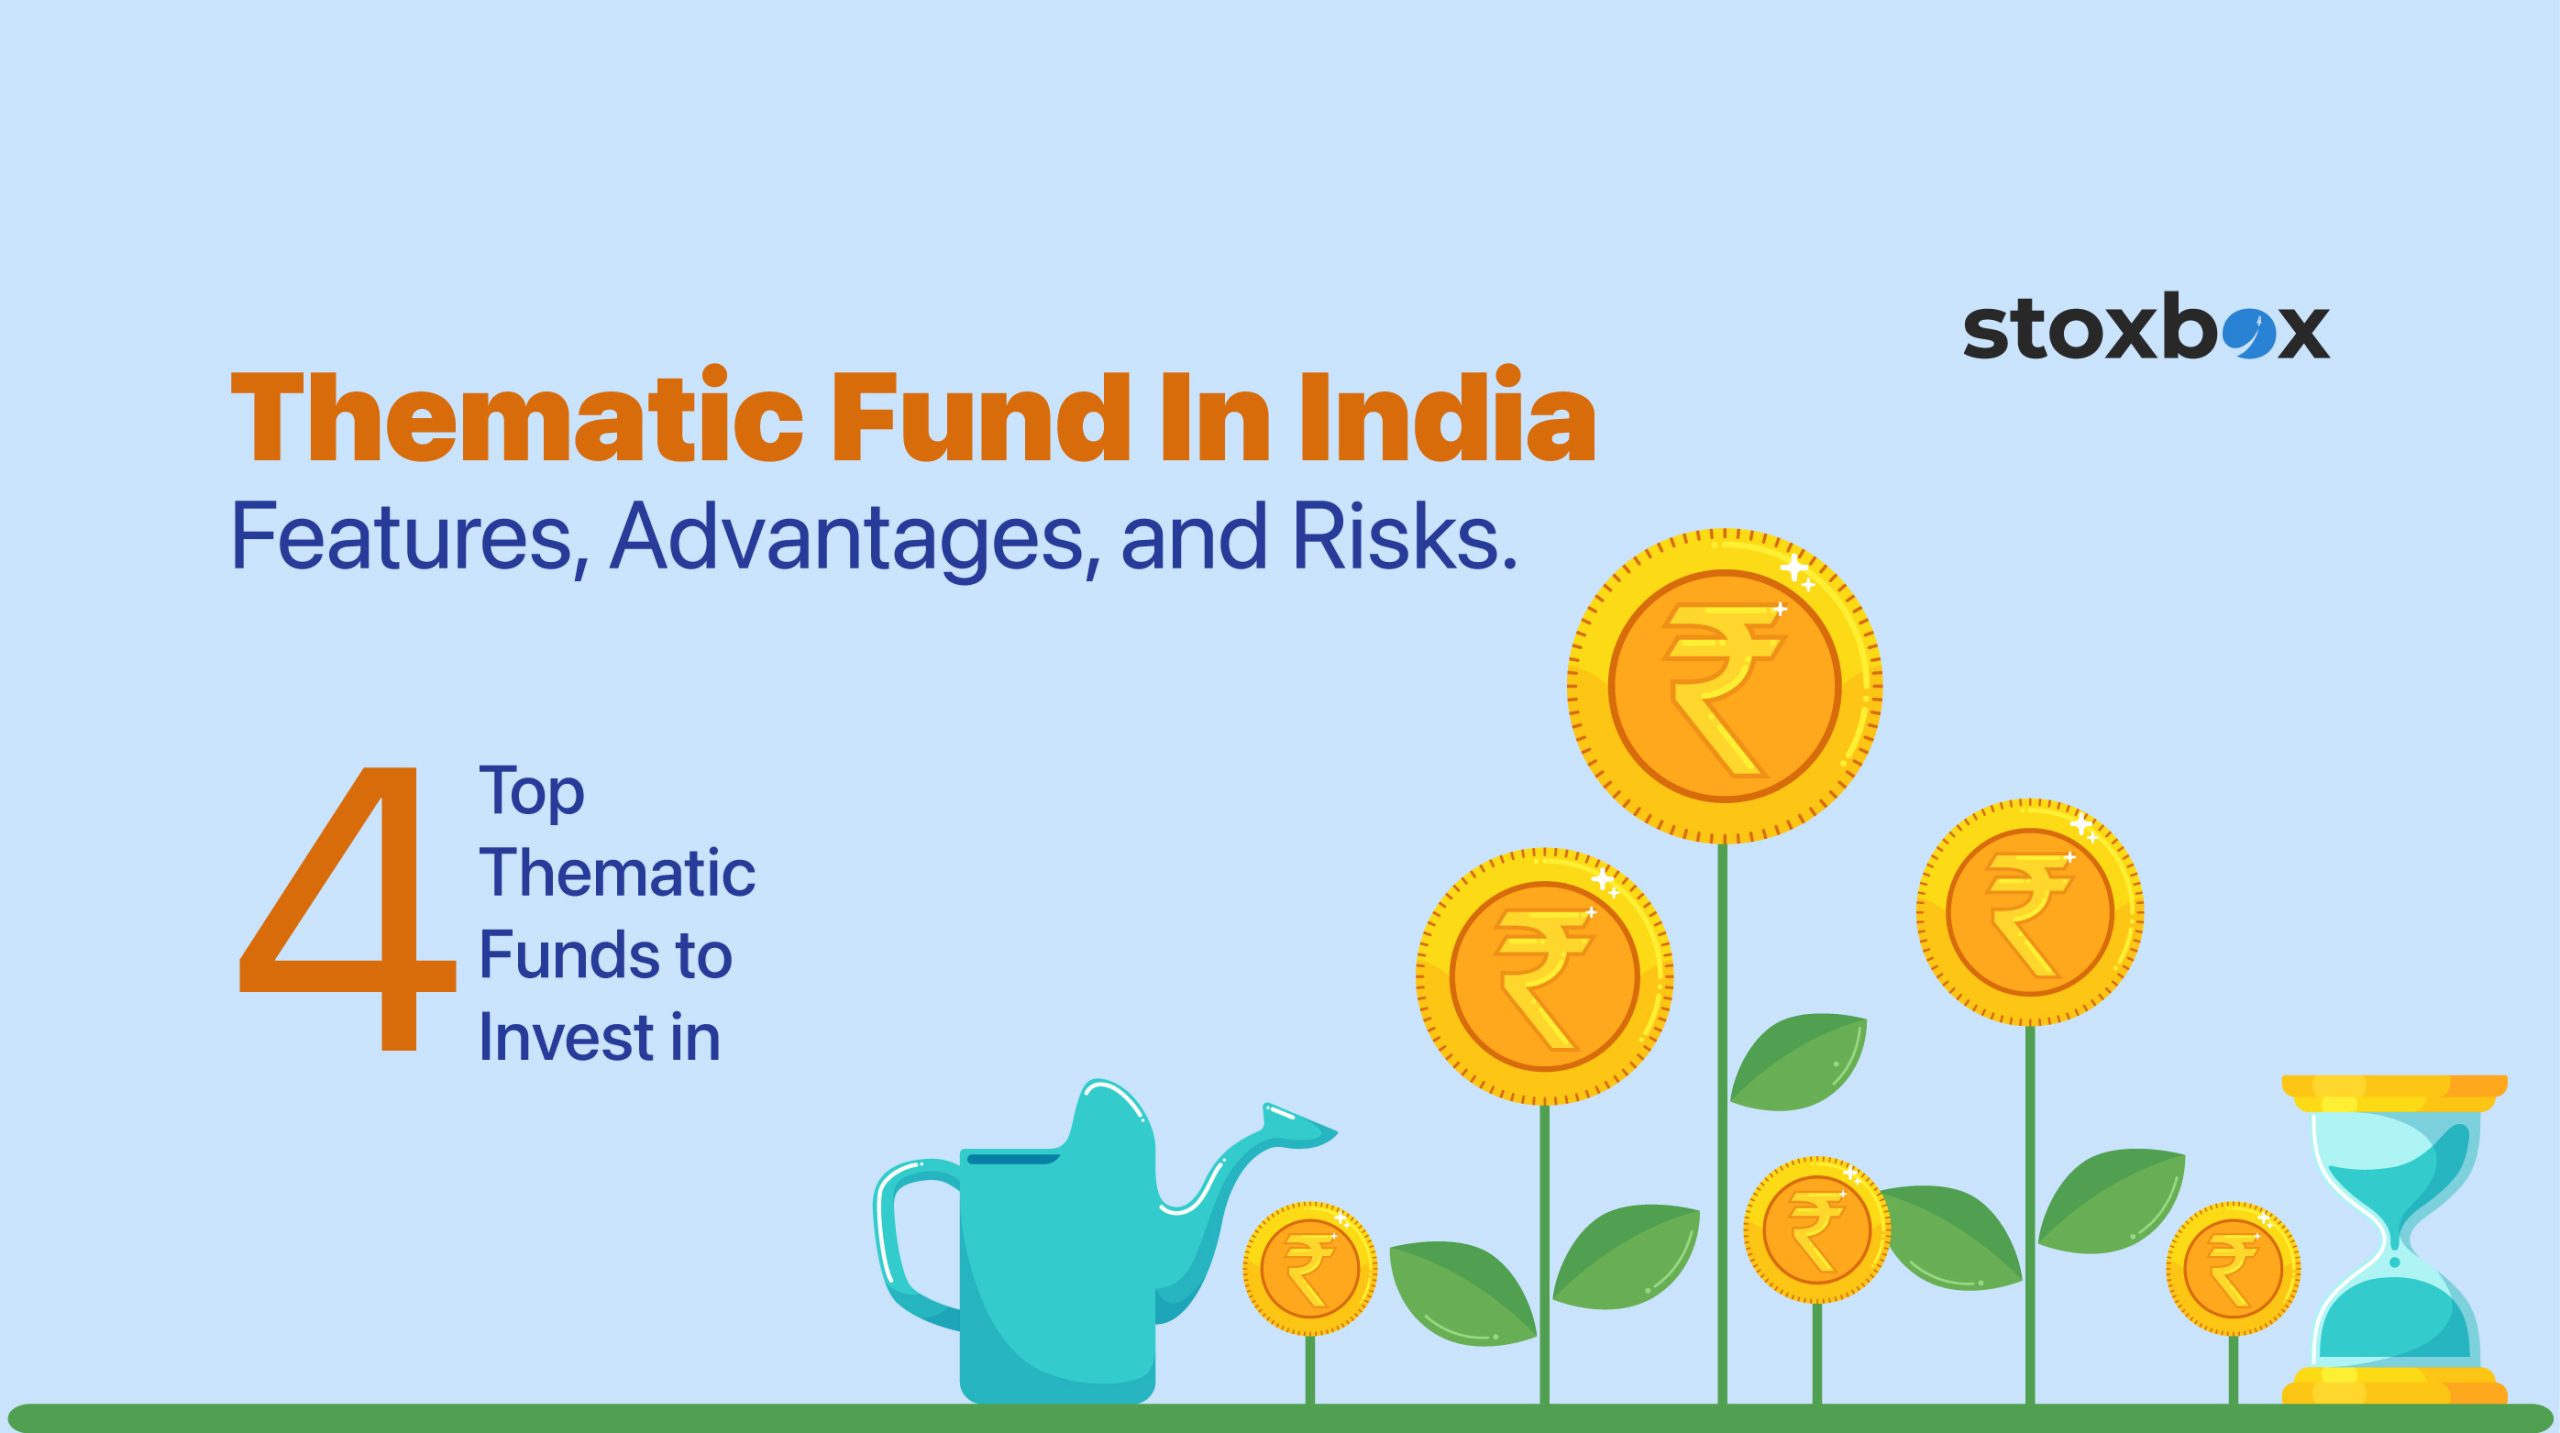 Thematic Funds in India Features, Advantages, and Risks.